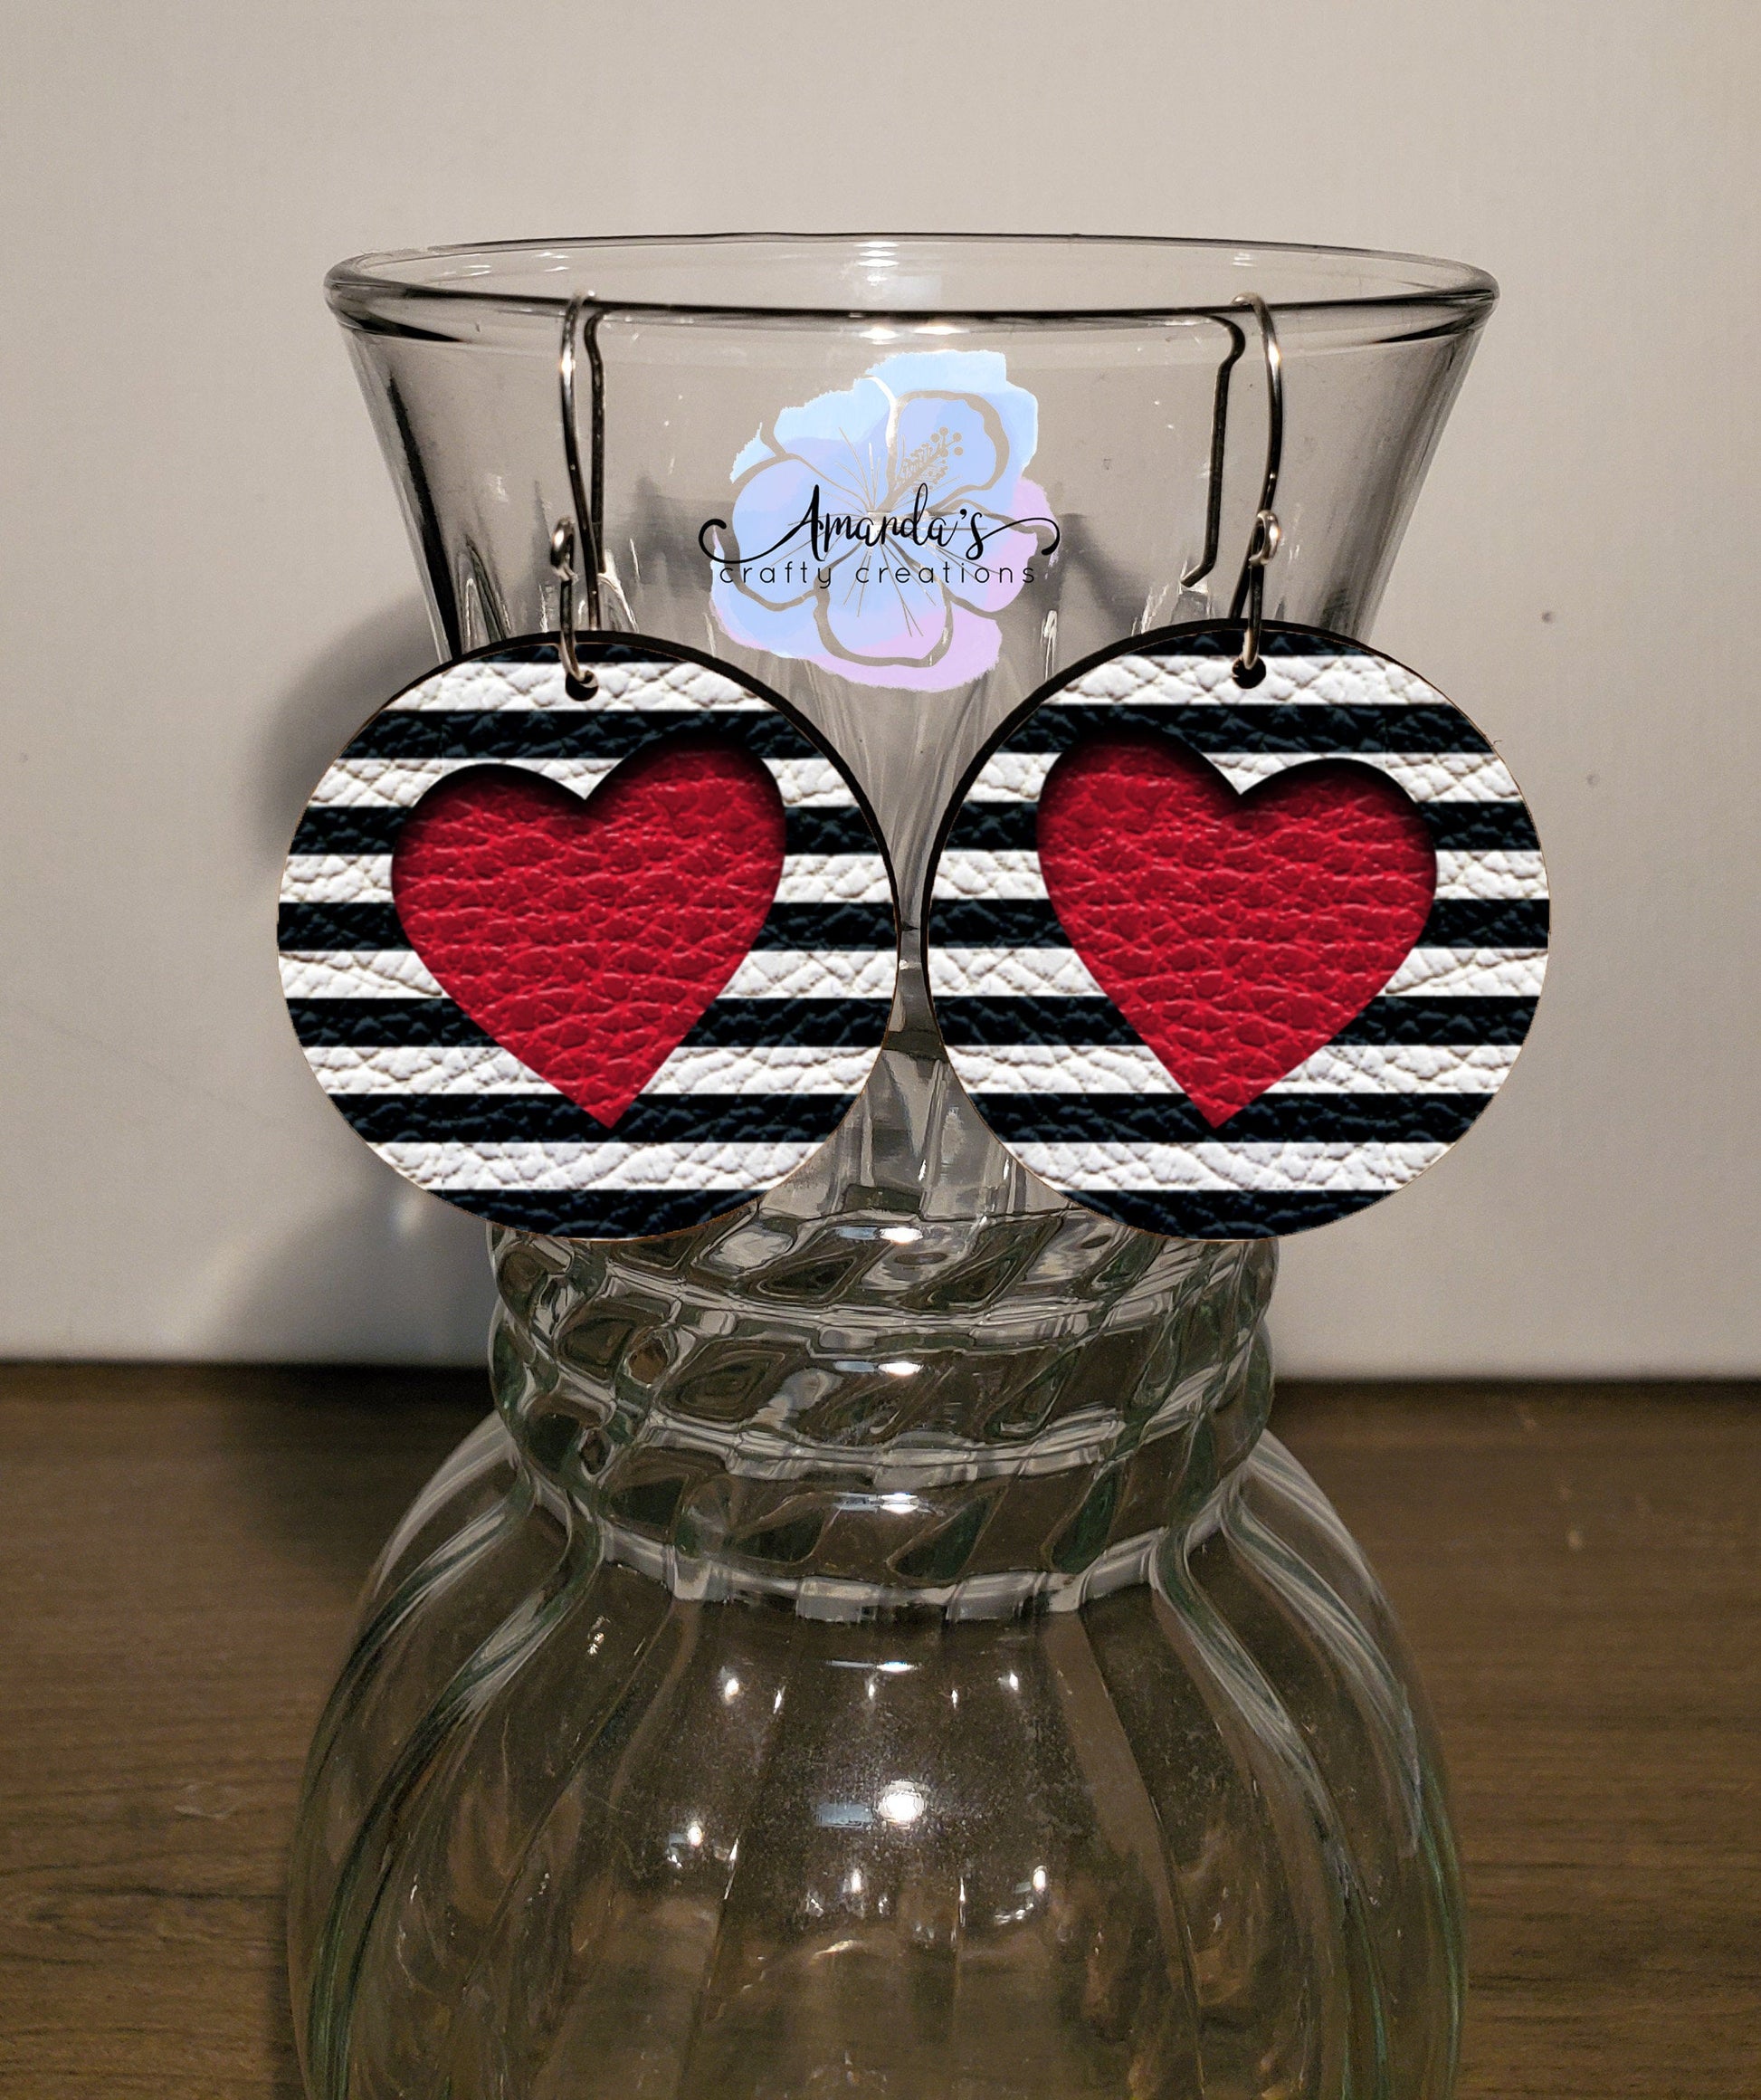 Drop Earrings, black and white stripes with red heart